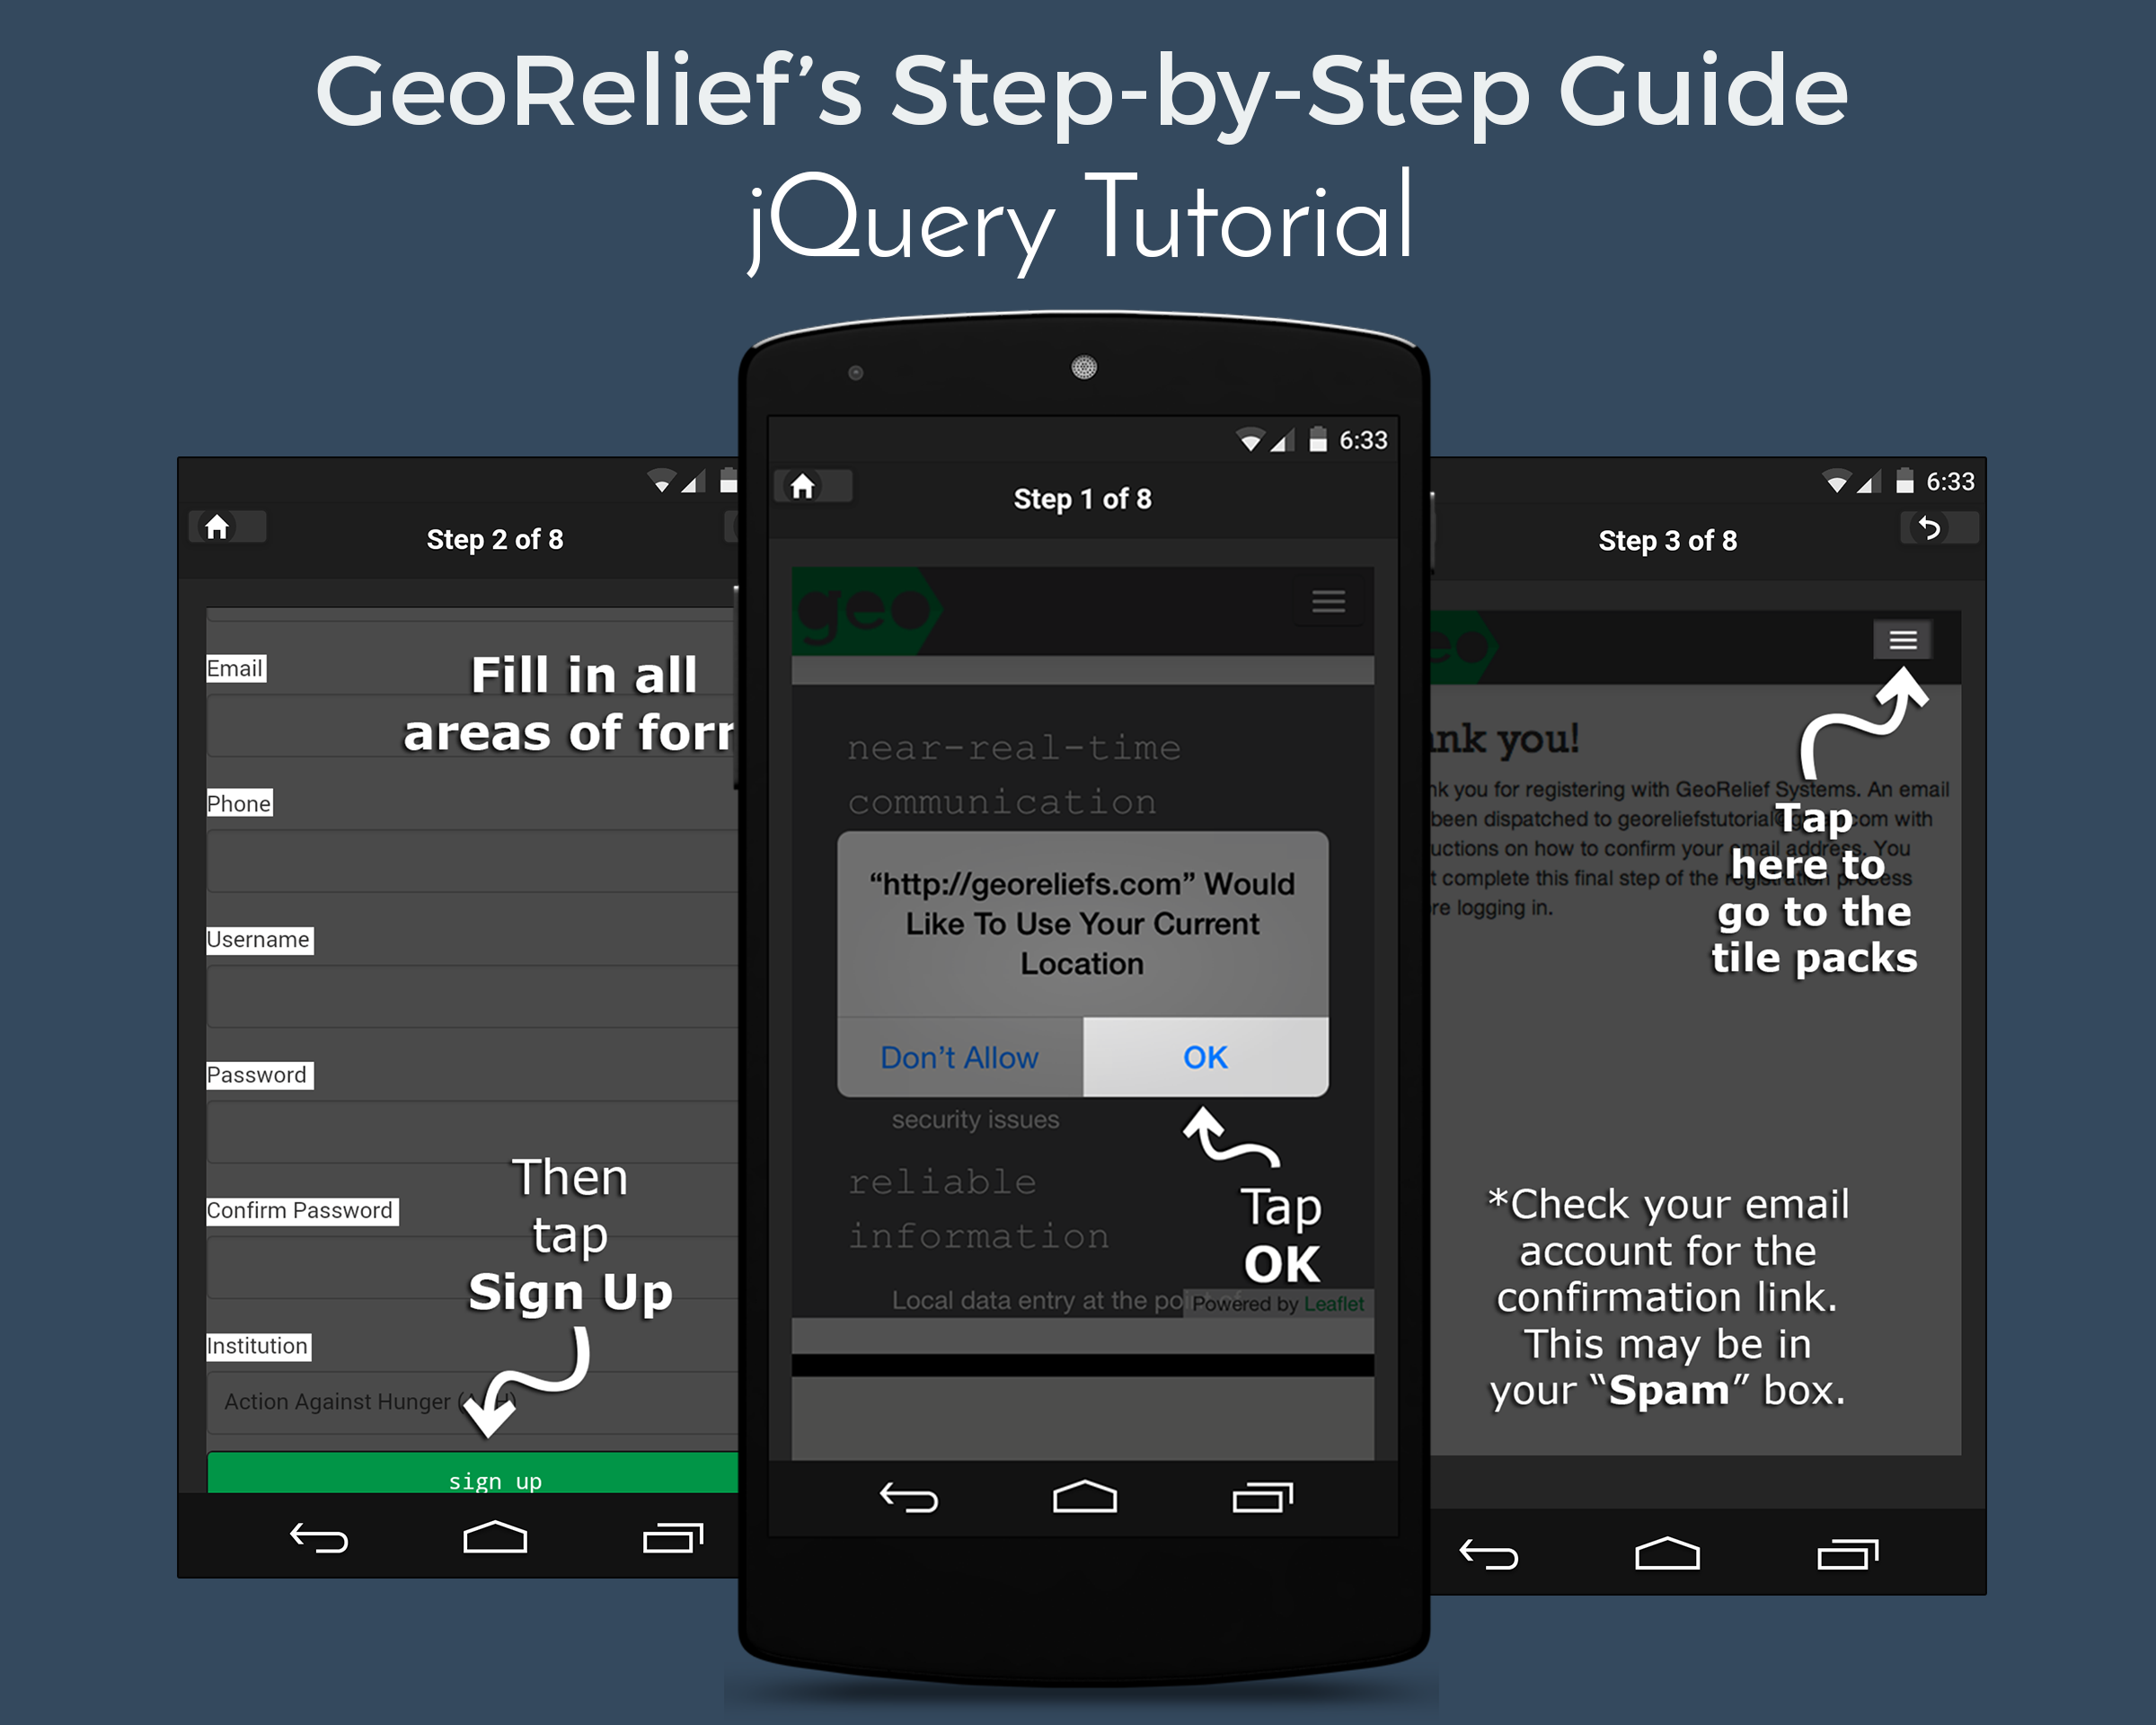 GeoReliefs Step-by-Step Guide